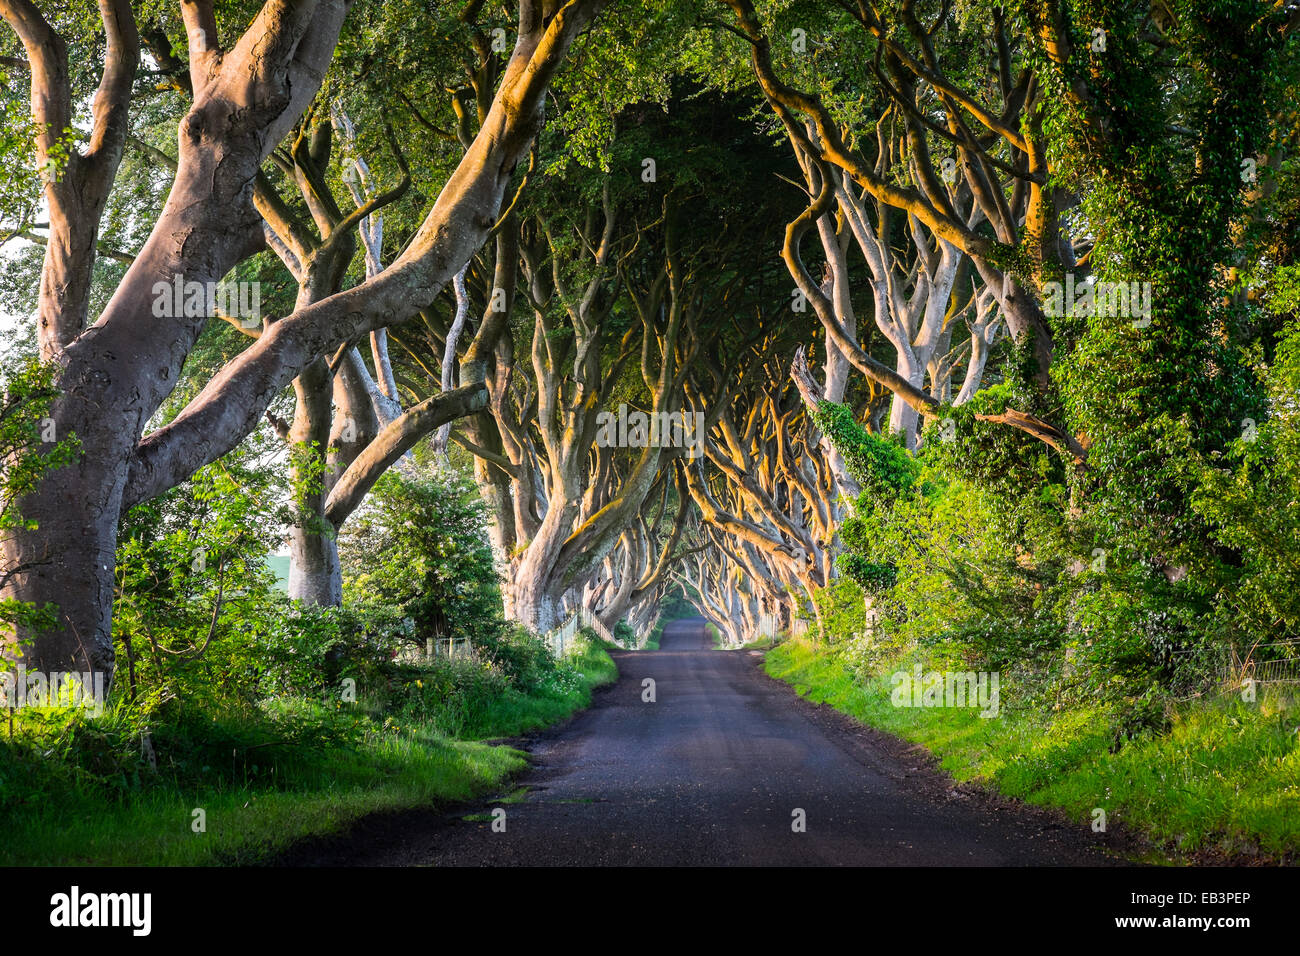 The Dark Hedges In Northern Ireland At Sunset In Beautiful Light Creating A Fairytale Image Where Also Part Of Game Of Thrones Stock Photo Alamy